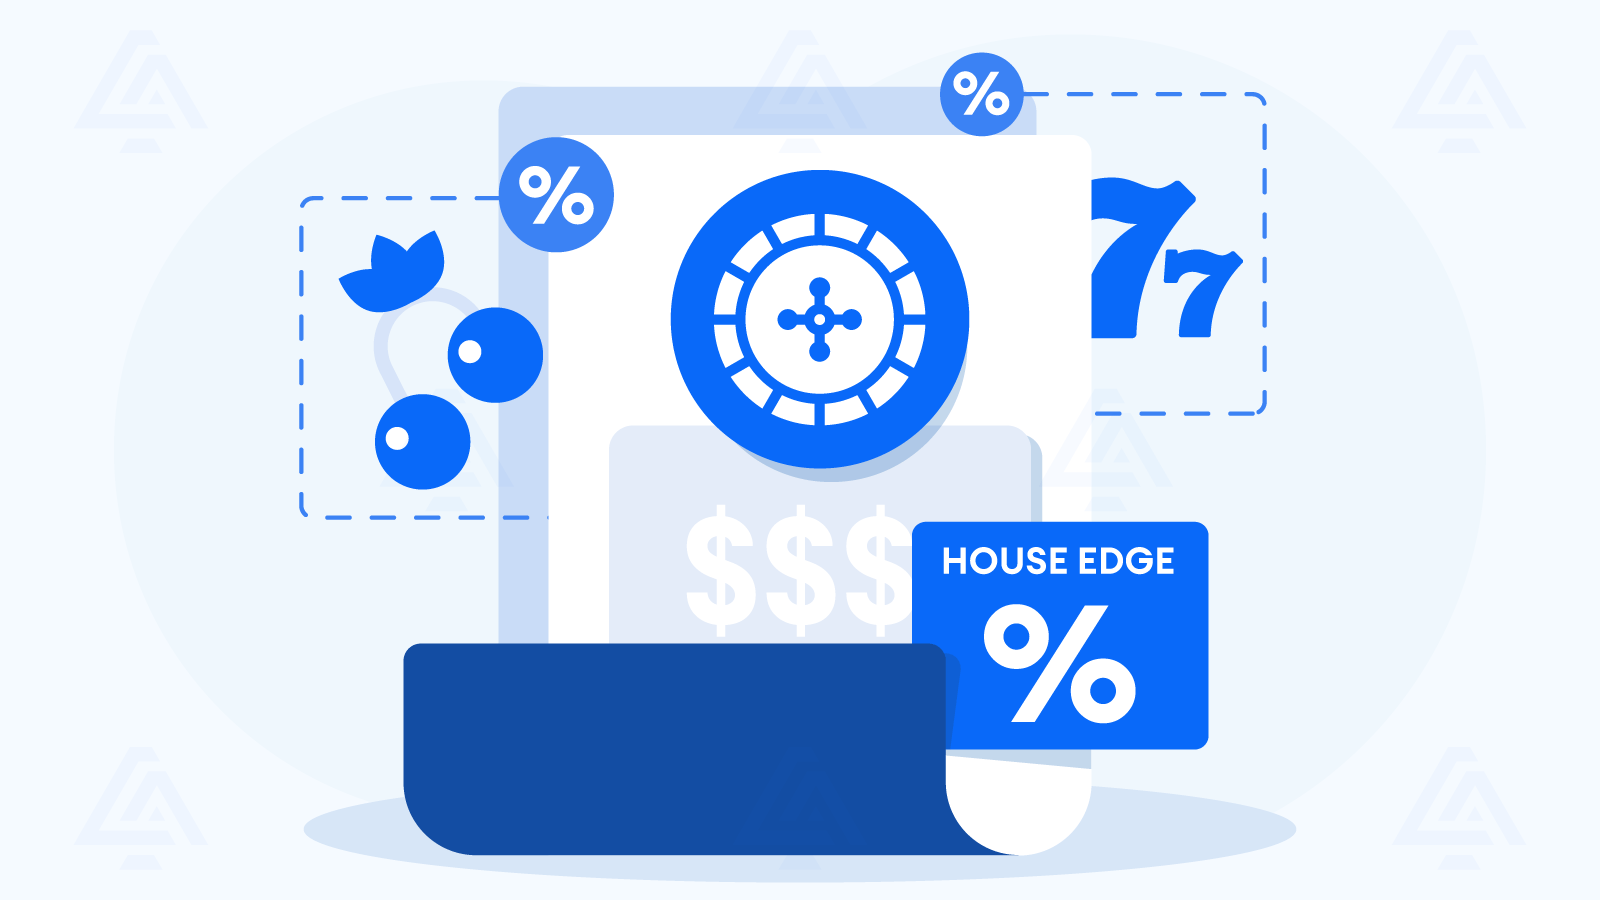 How to Evaluate the House Edge on Casino Games